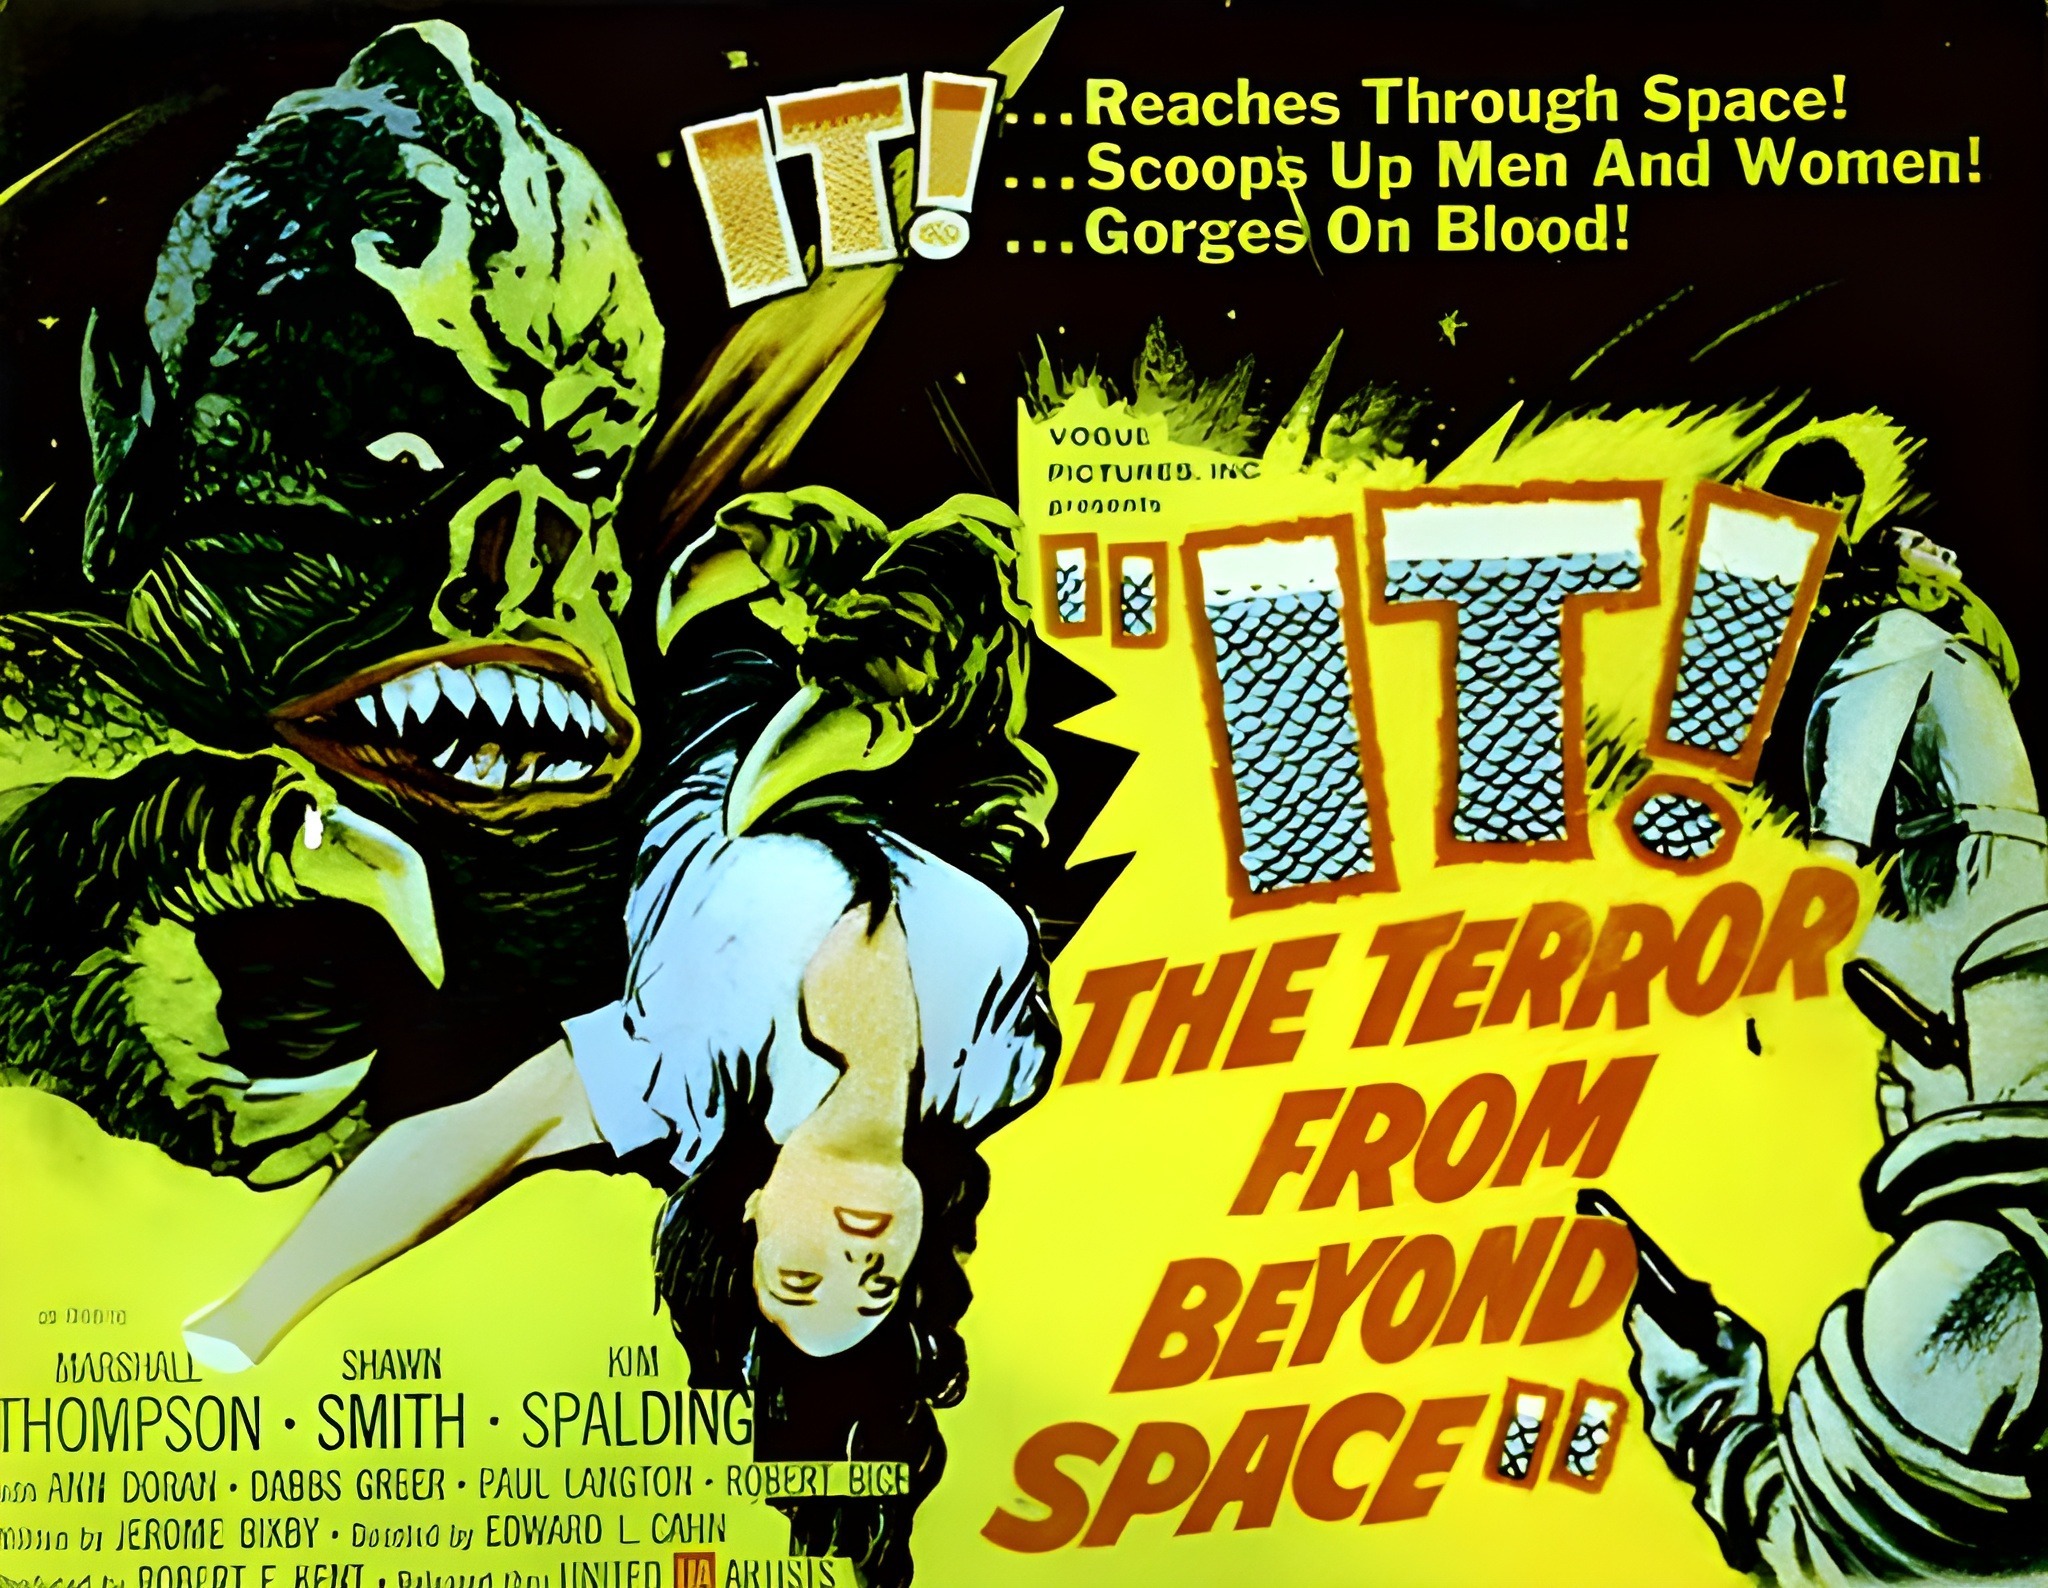 It the Terror from Beyond Space, (1958)